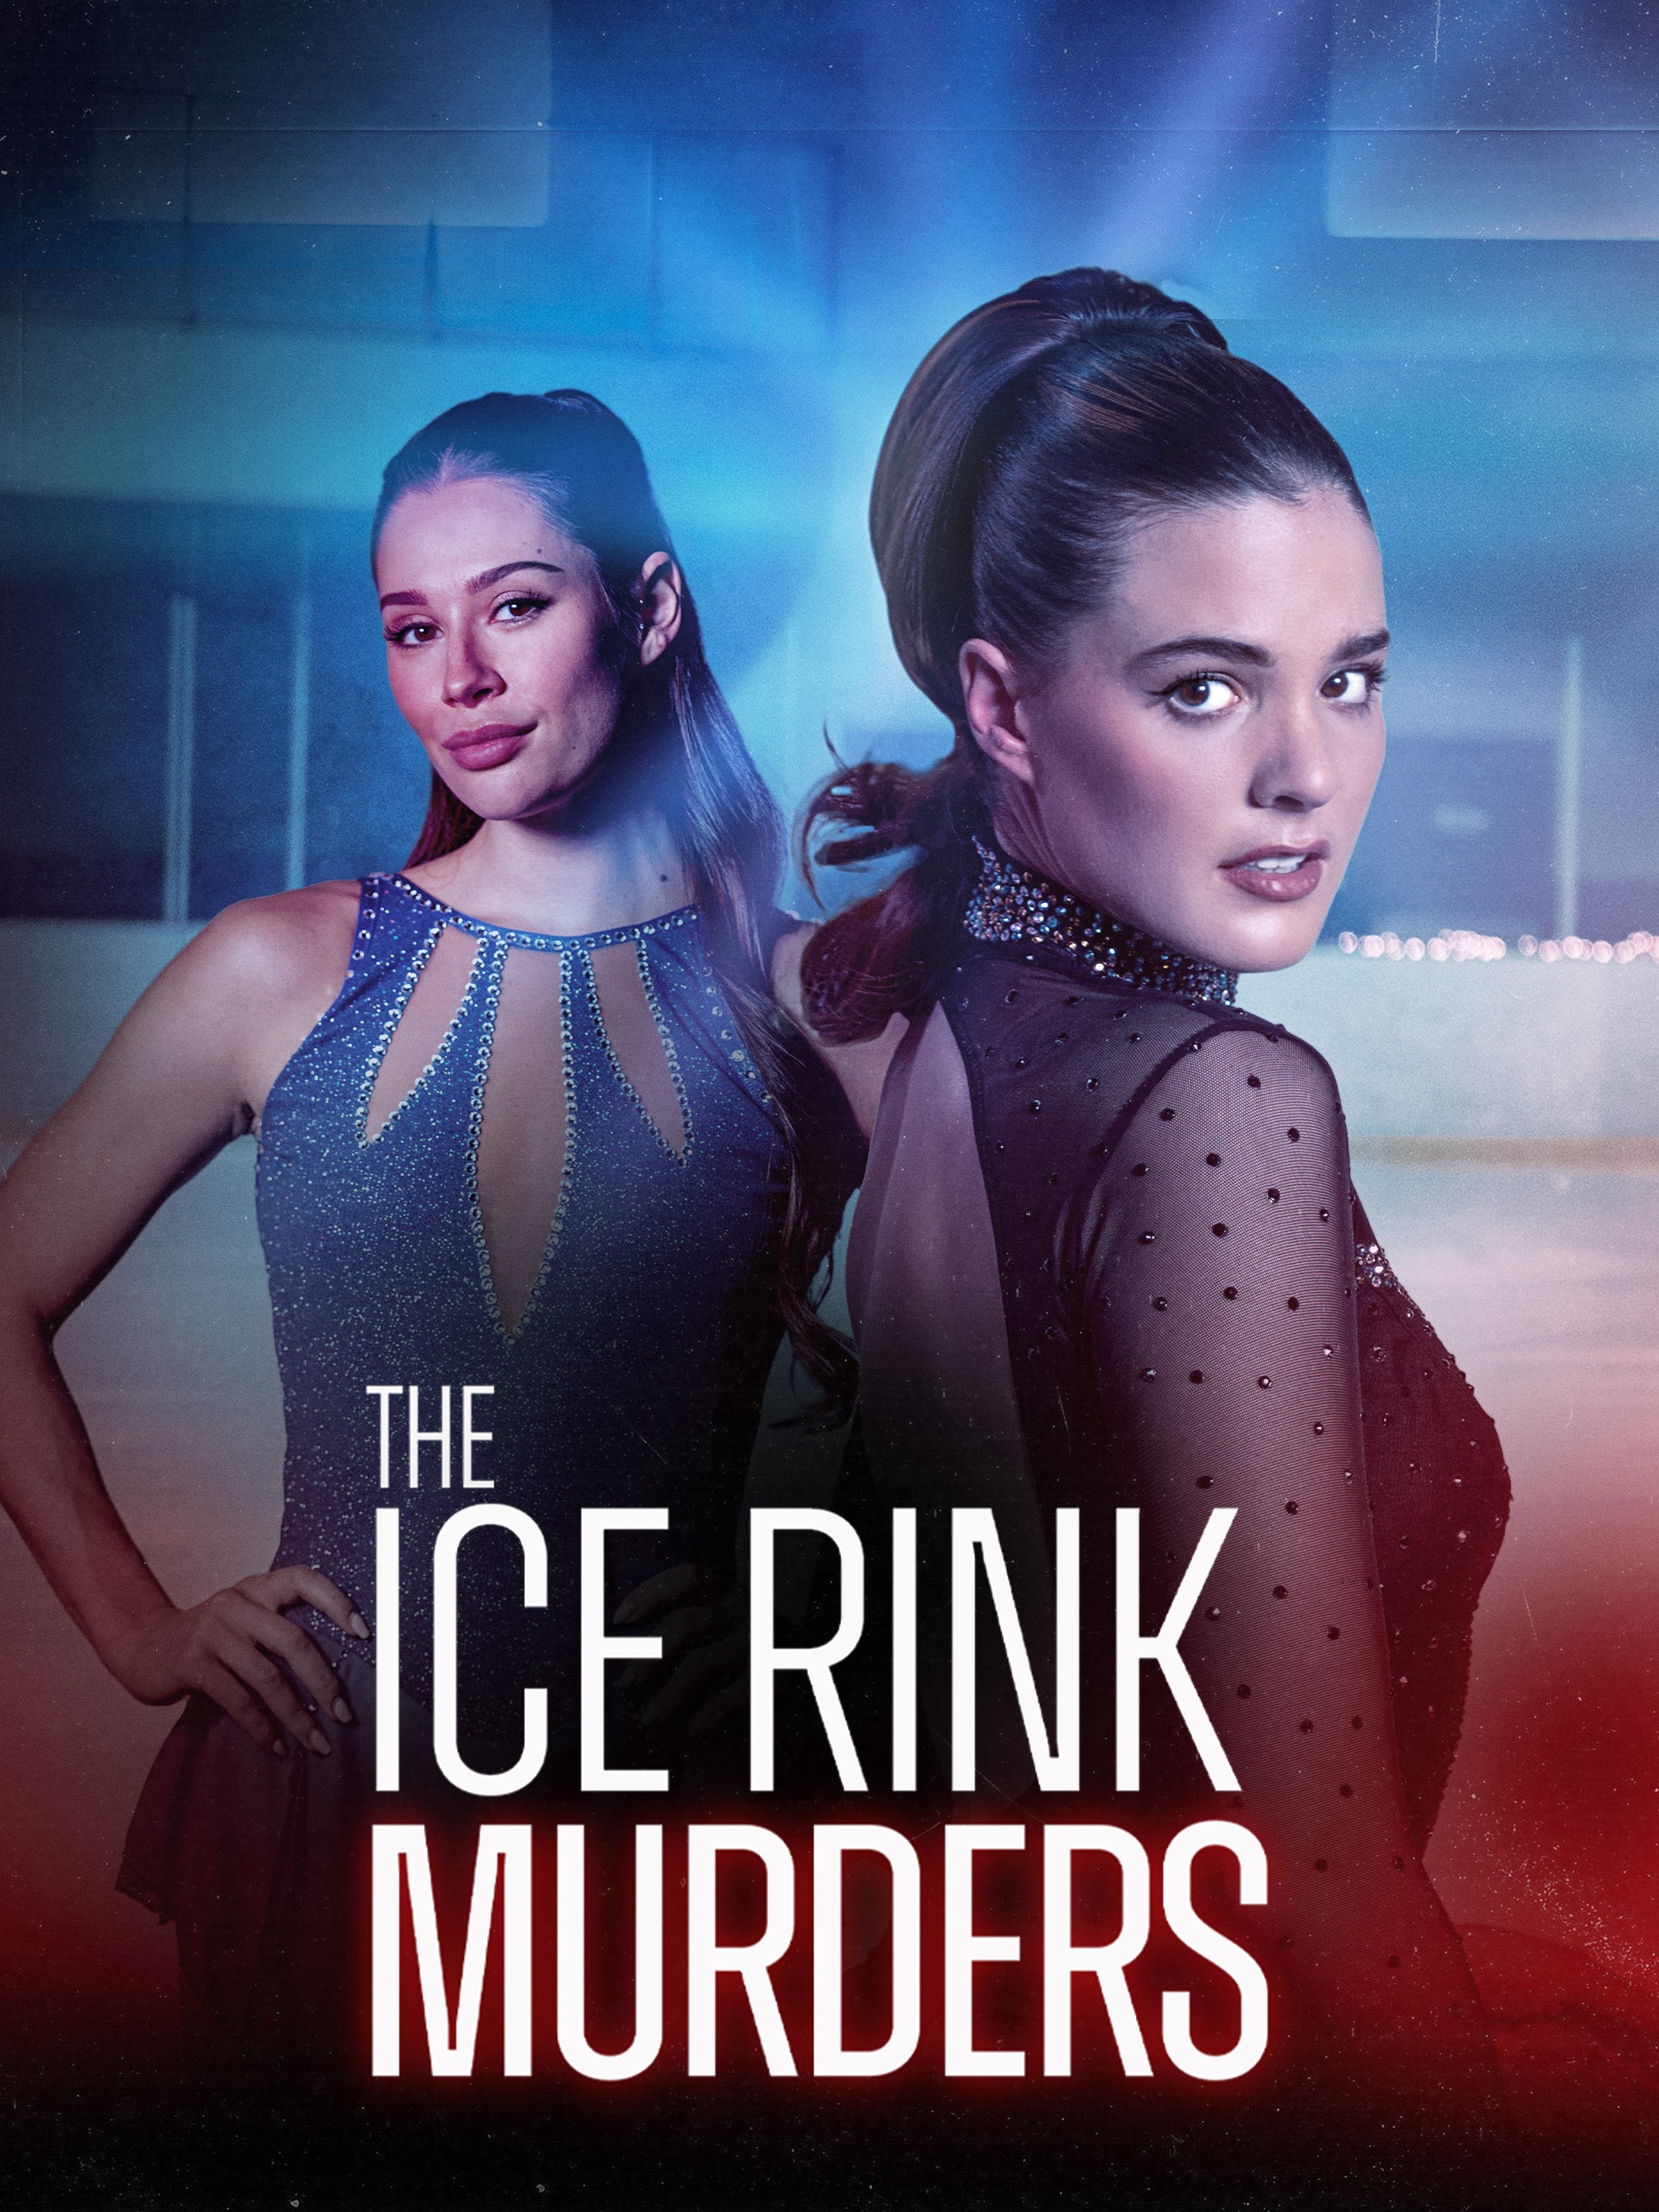 The Ice Rink Murders | Rotten Tomatoes